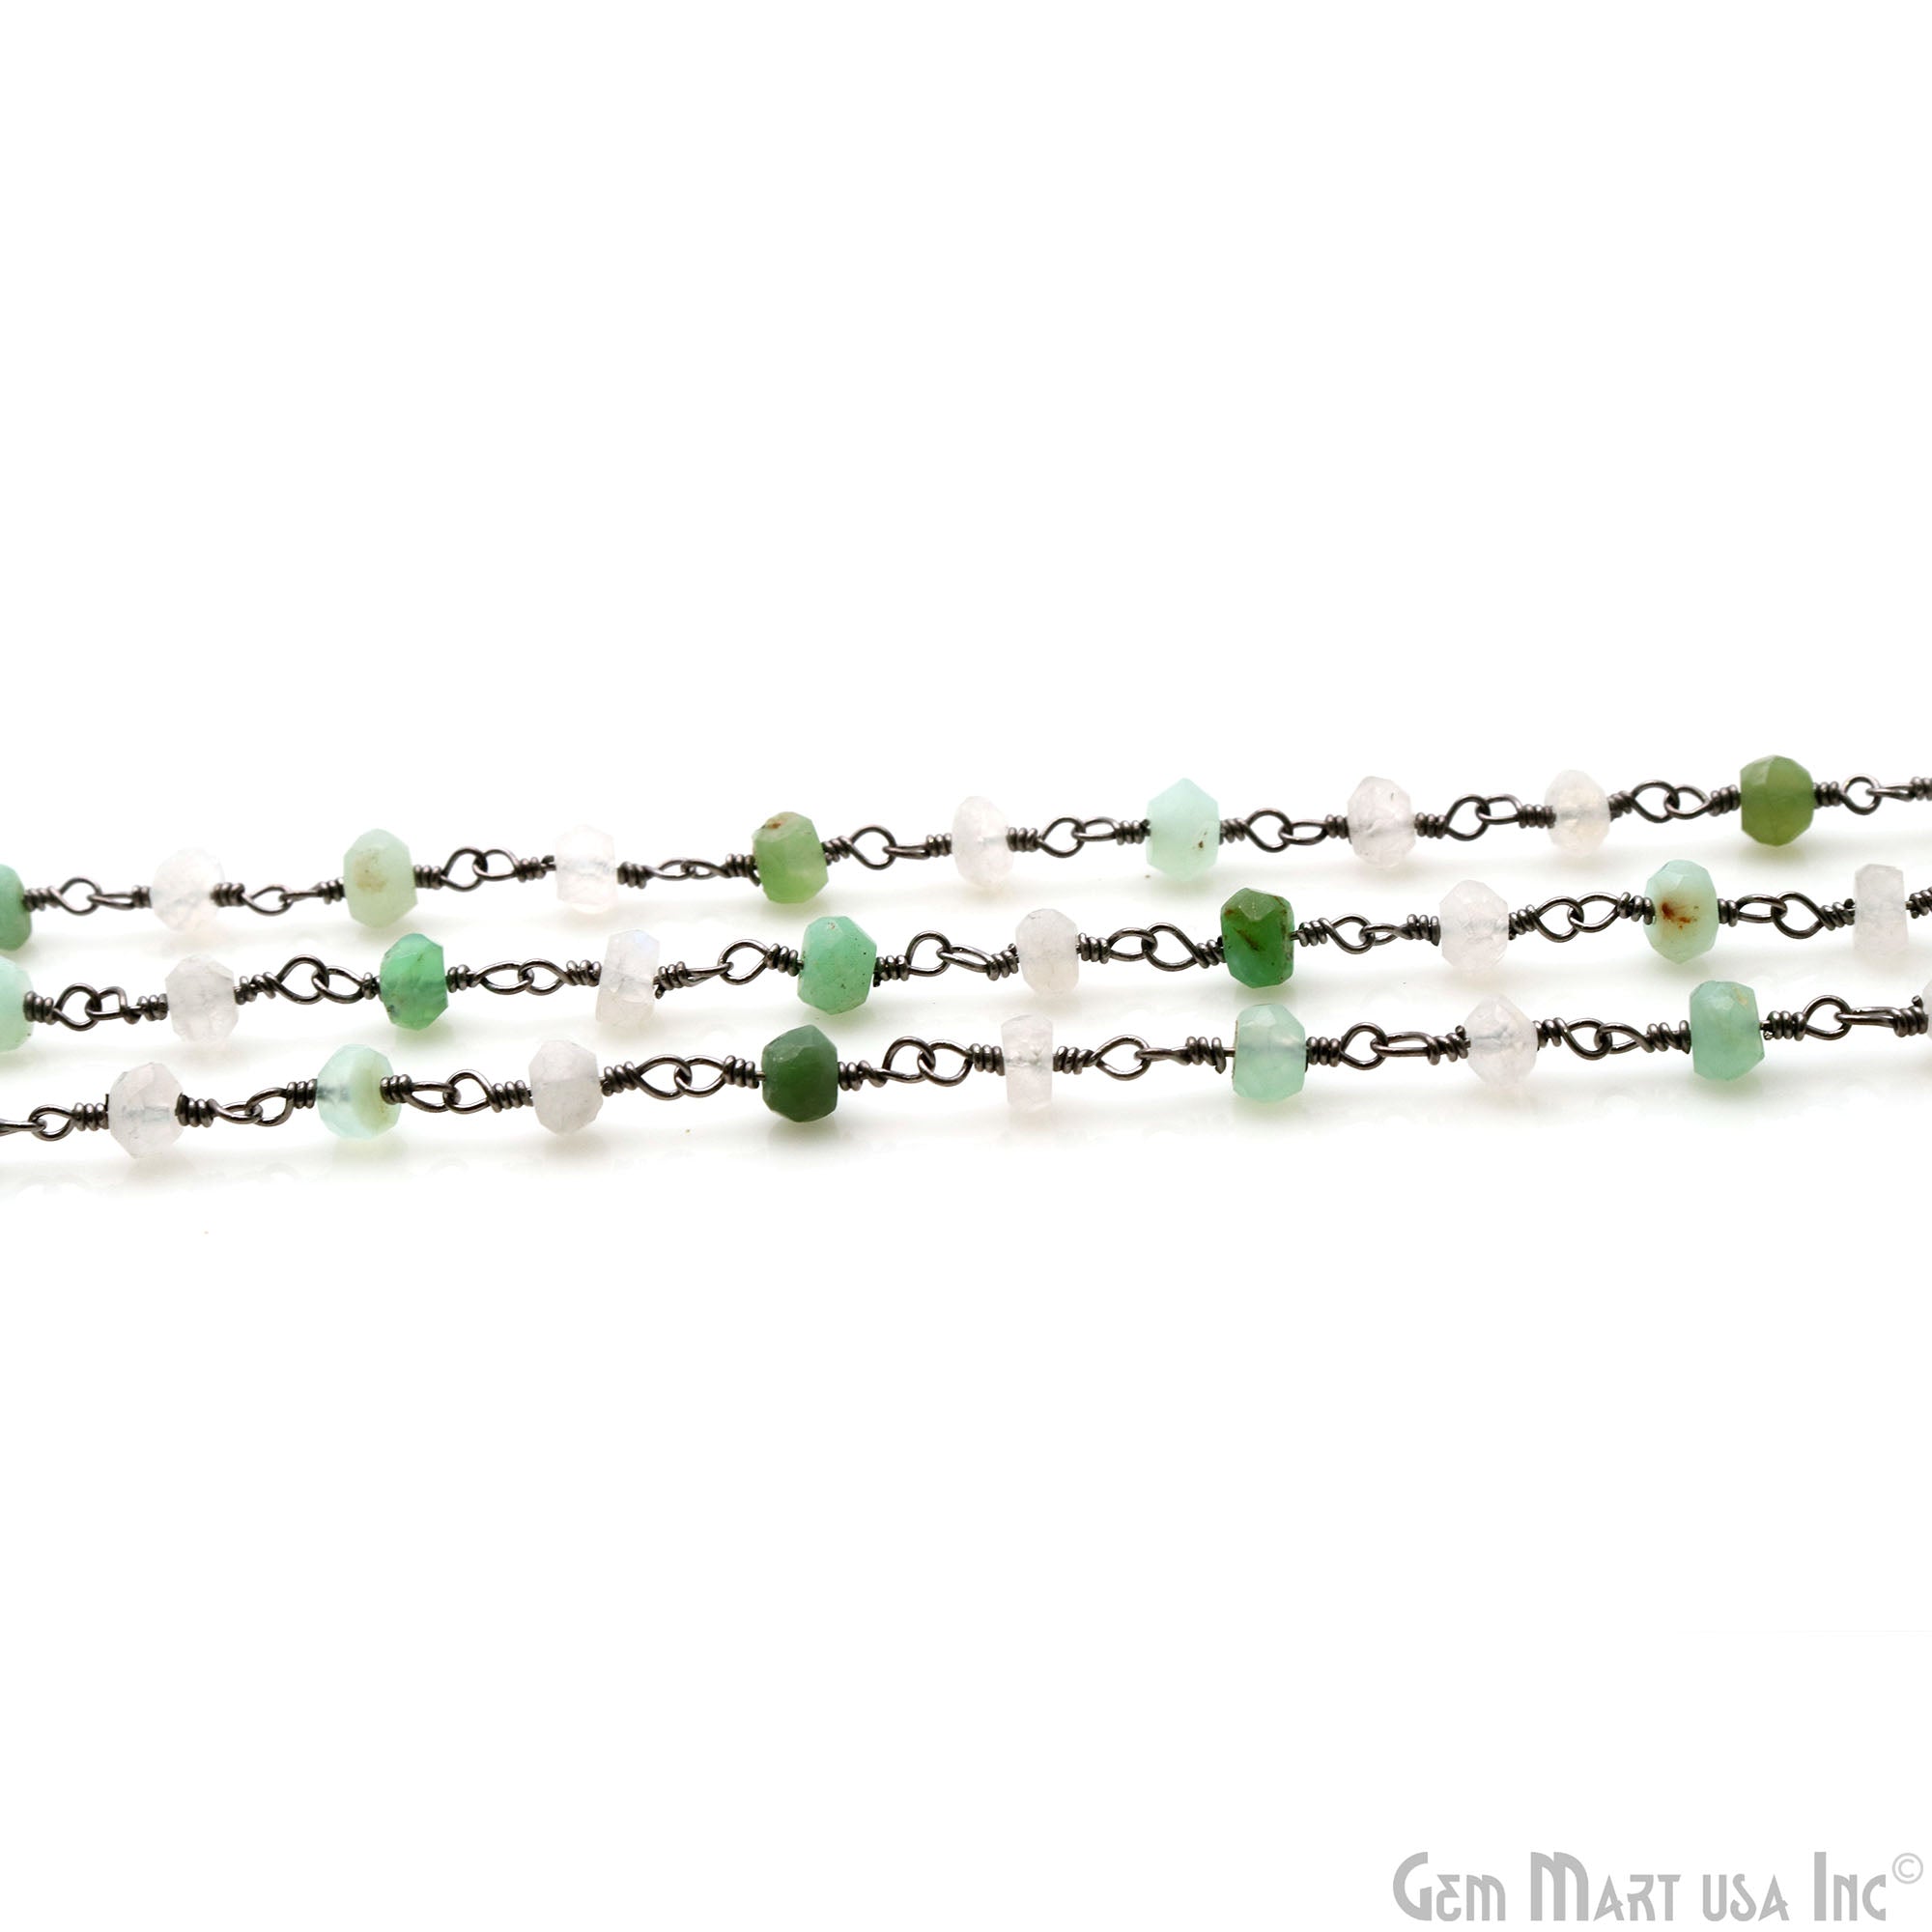 Chrysoprase With Rainbow Faceted 3-3.5mm Oxidized Wire Wrapped Beads Rosary Chain